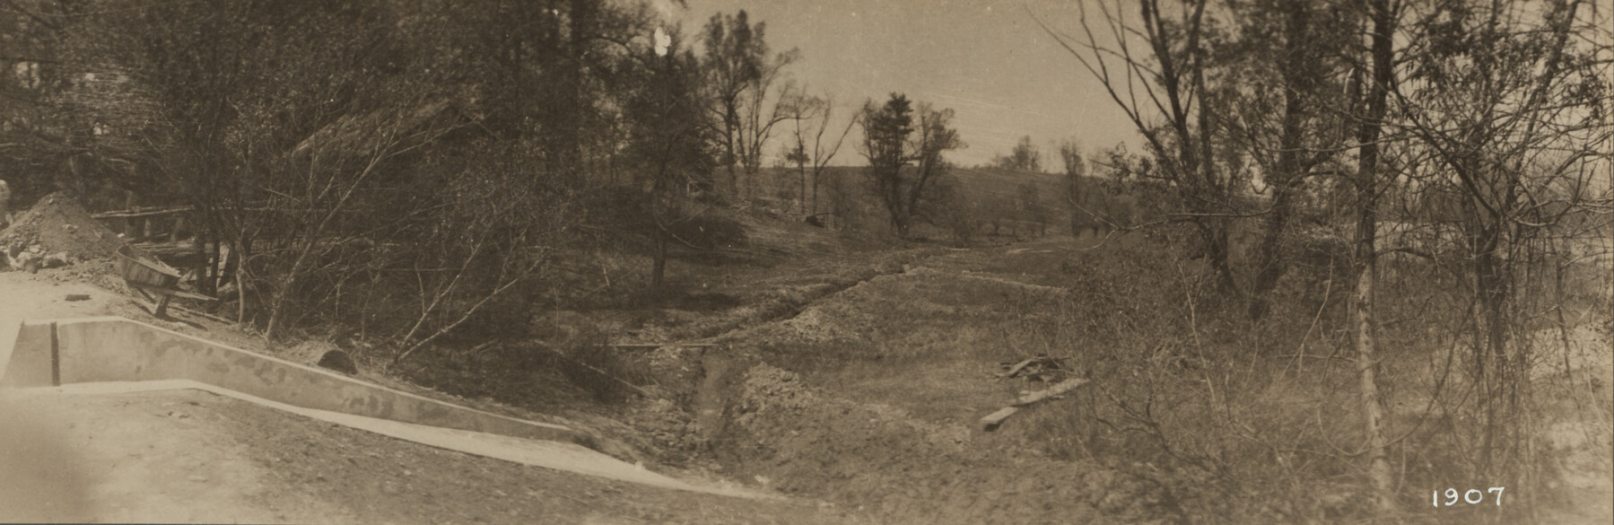 A sepia-toned old photo of a large expanse landscape